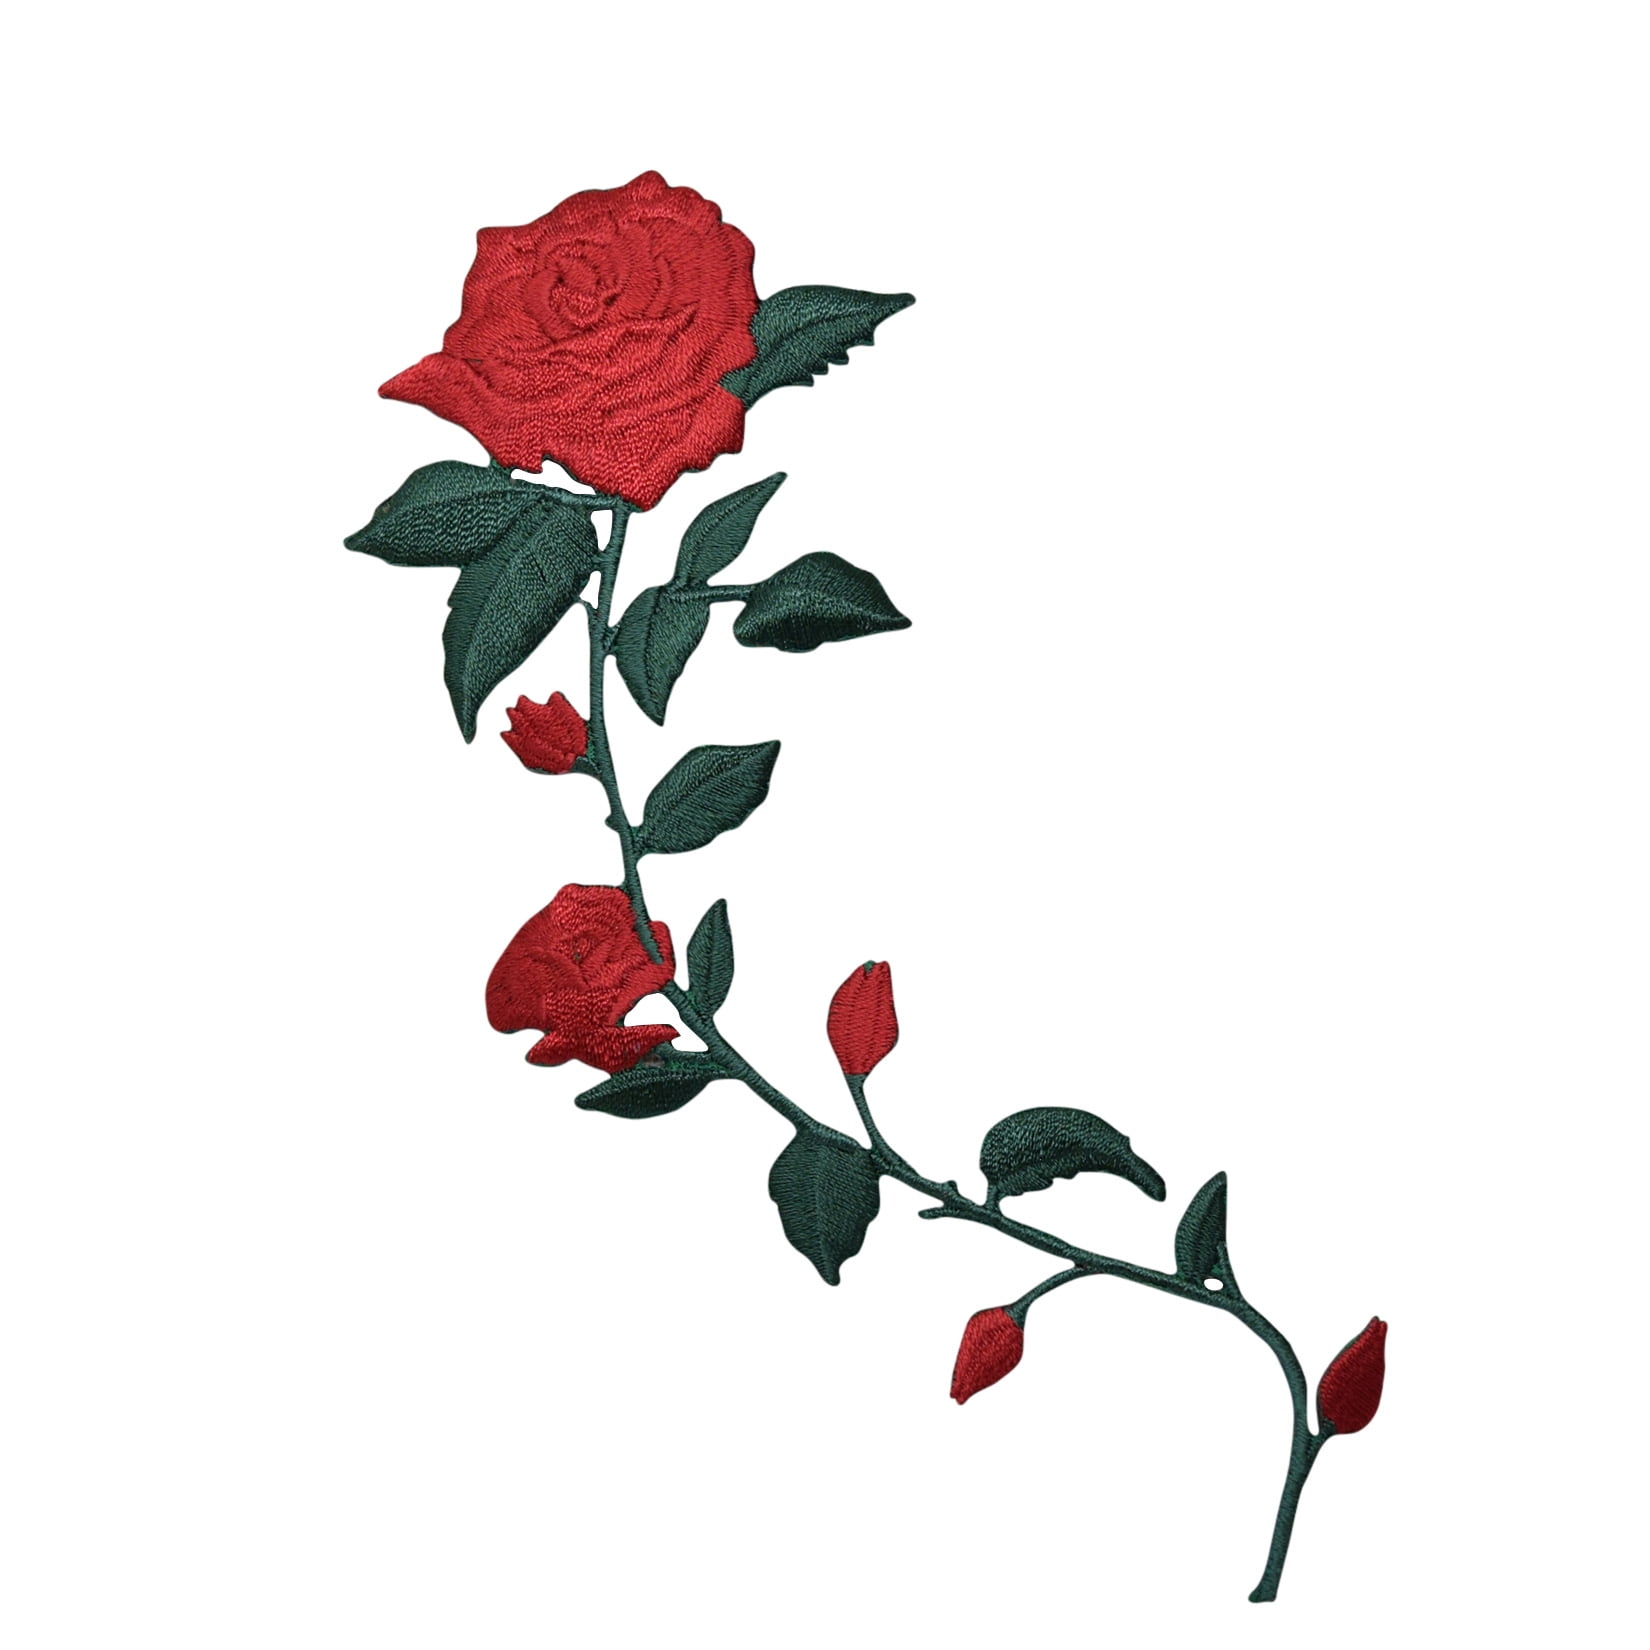 Iron on Applique/Embroidered Patch Large Red Rose on Vine/Stem RIGHT 695735AR 